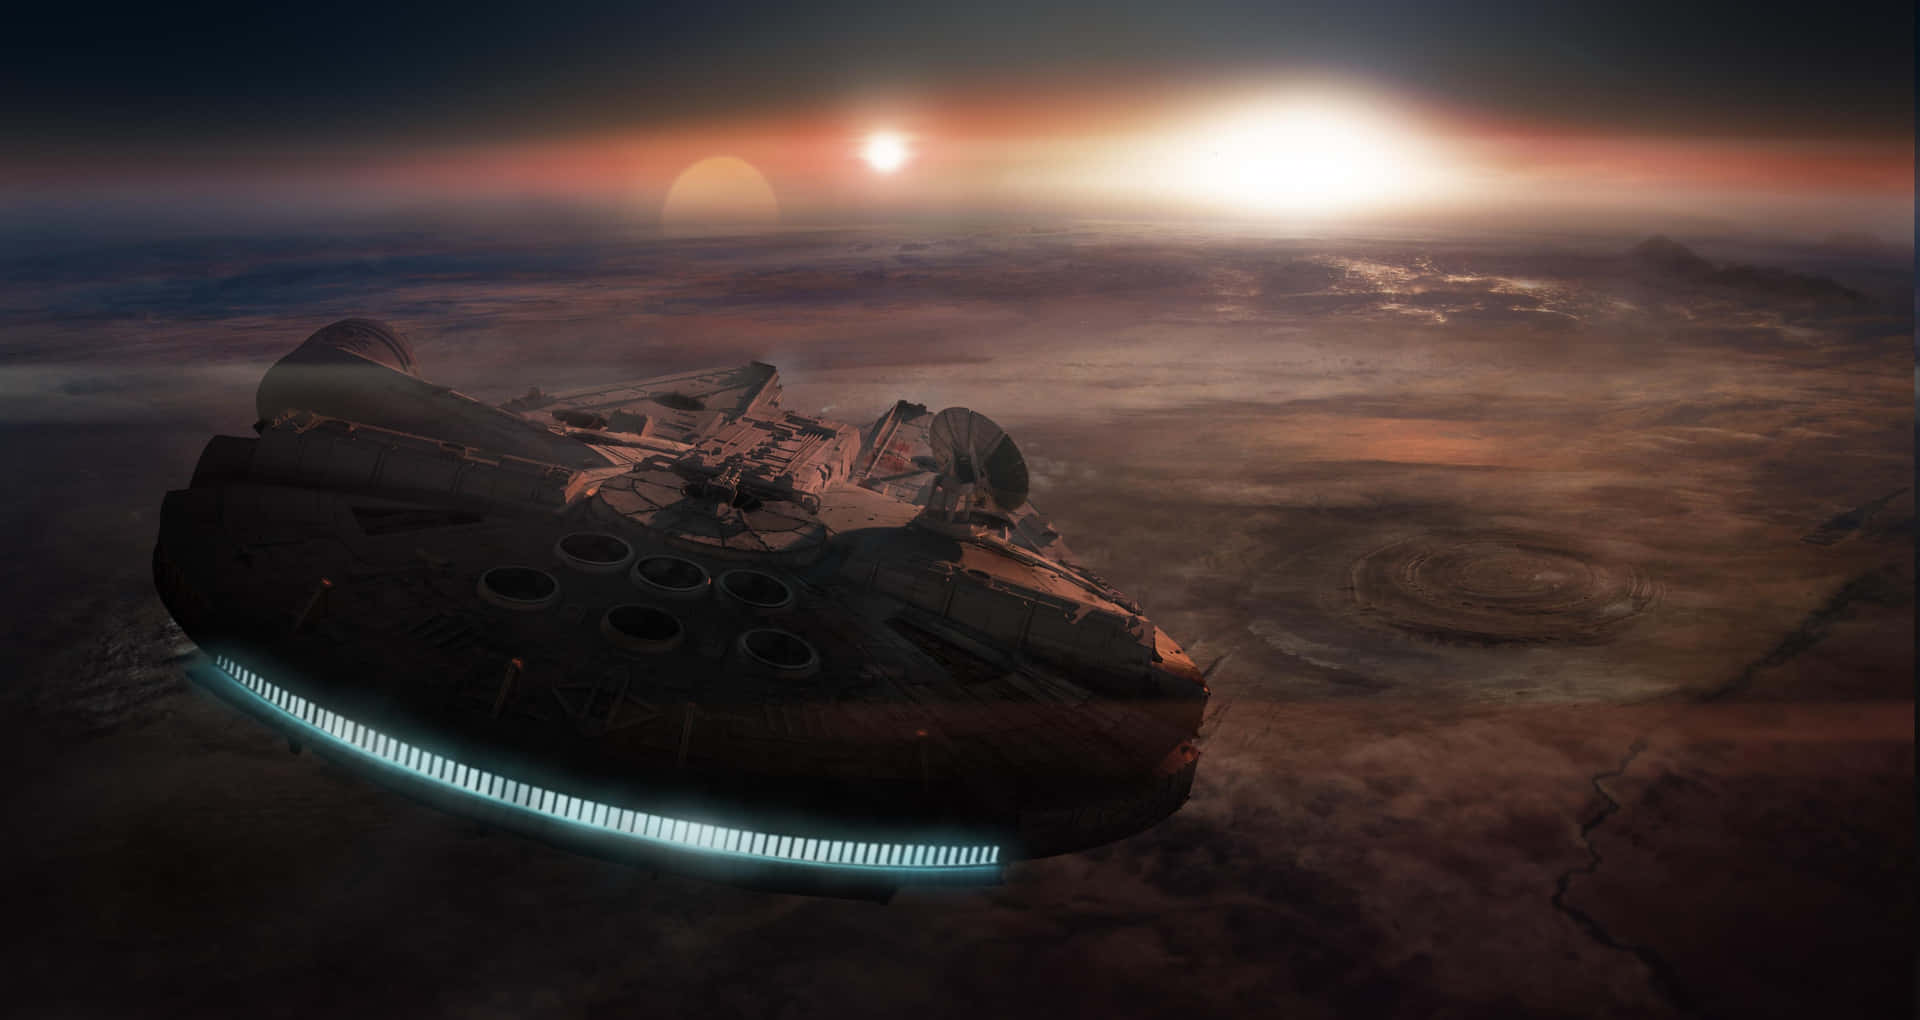 "Take the Millenium Falcon to go on your own space adventure!" Wallpaper